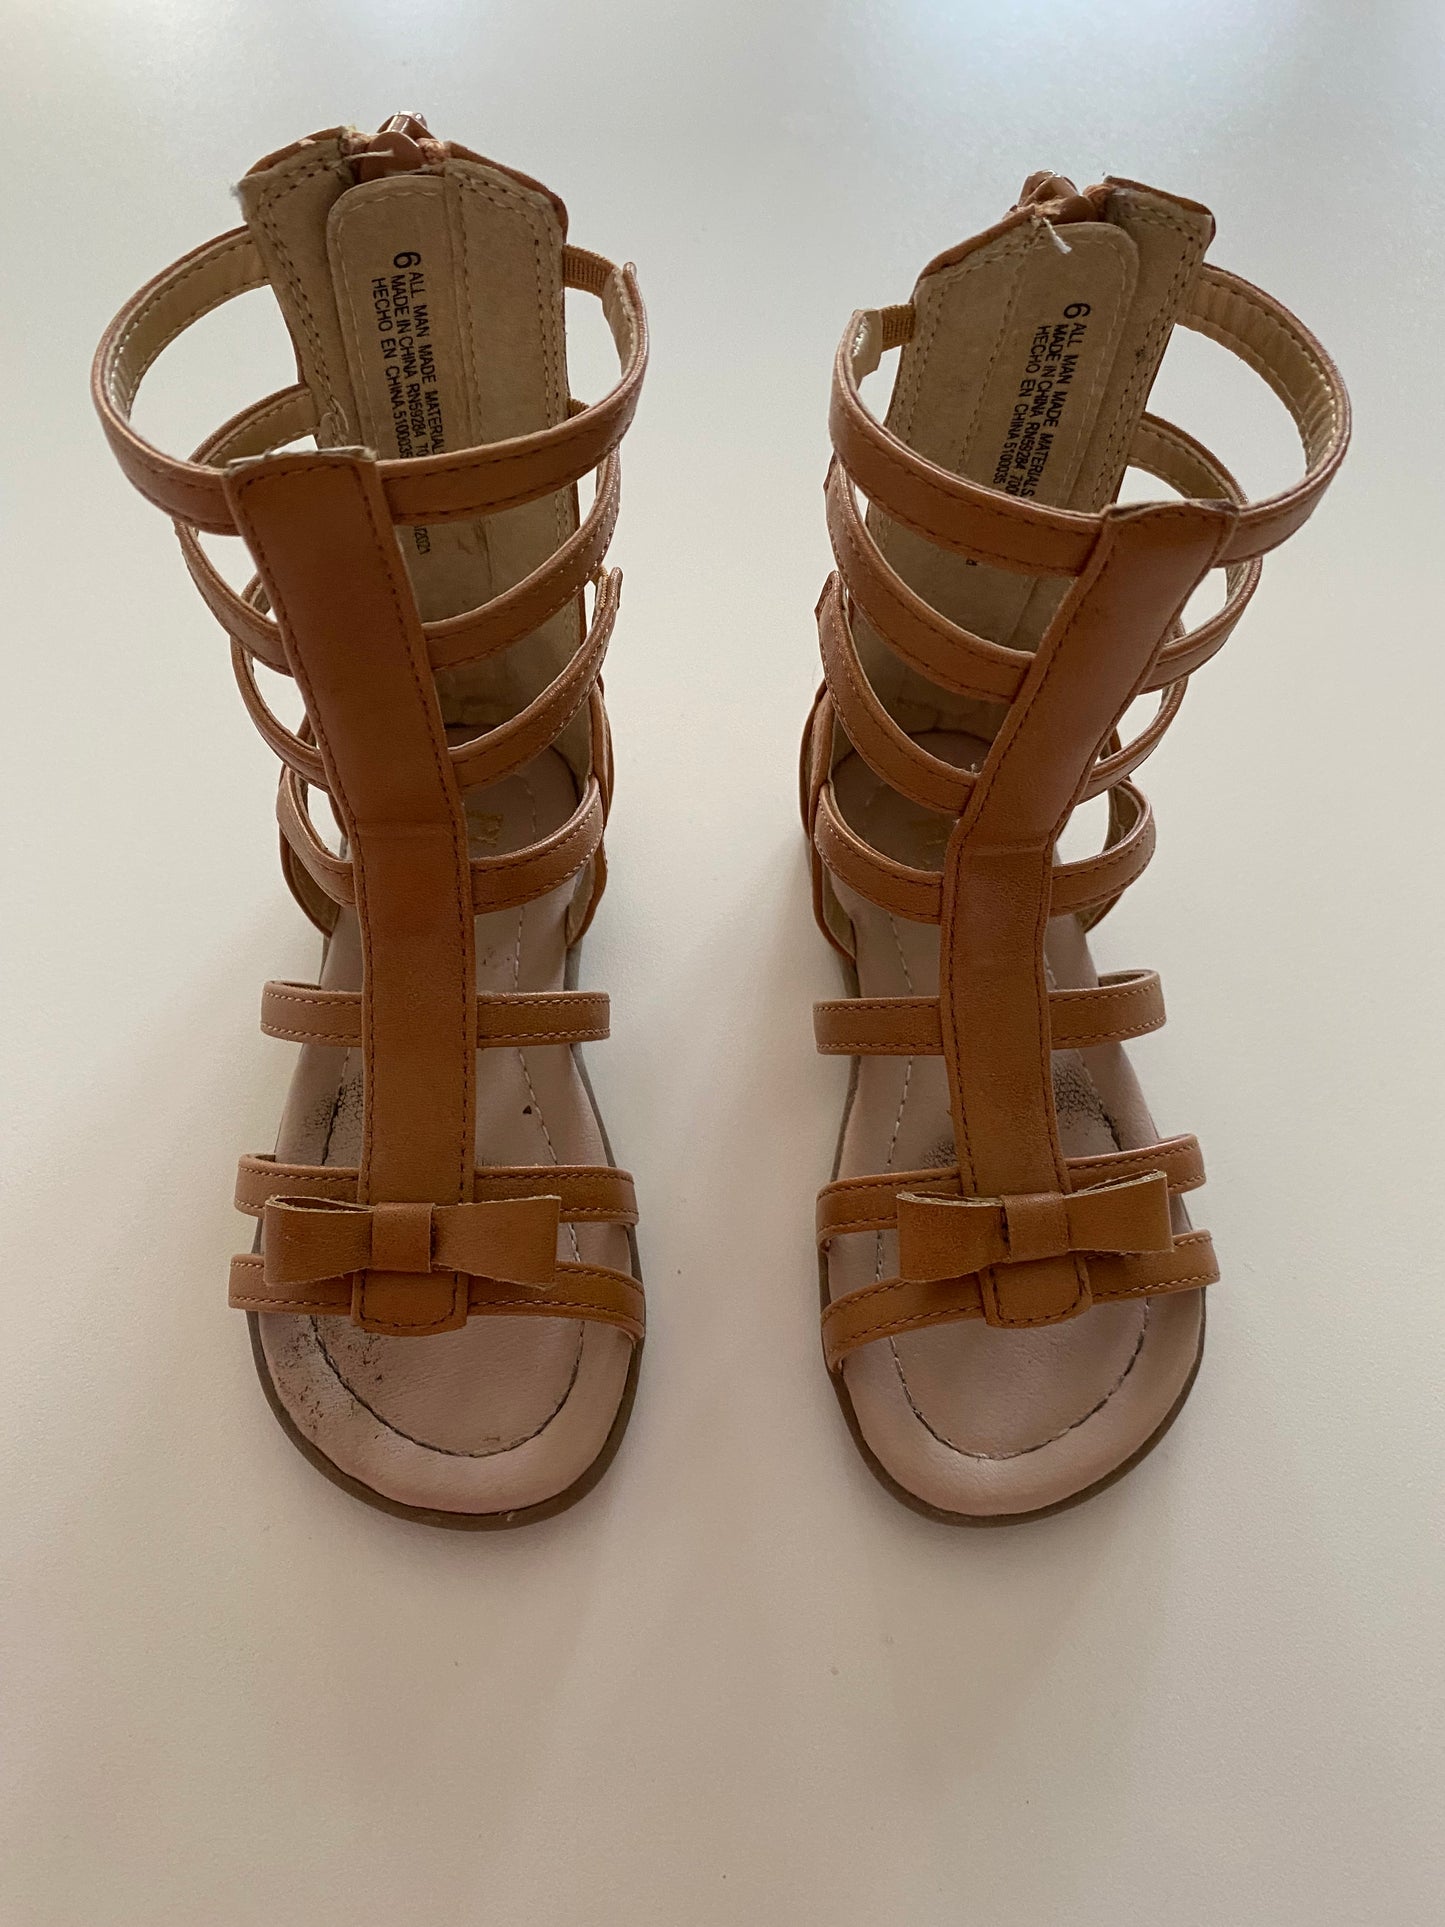 The Children’s Place Brown Gladiator Style Sandal Toddler Girls Shoe Size 6